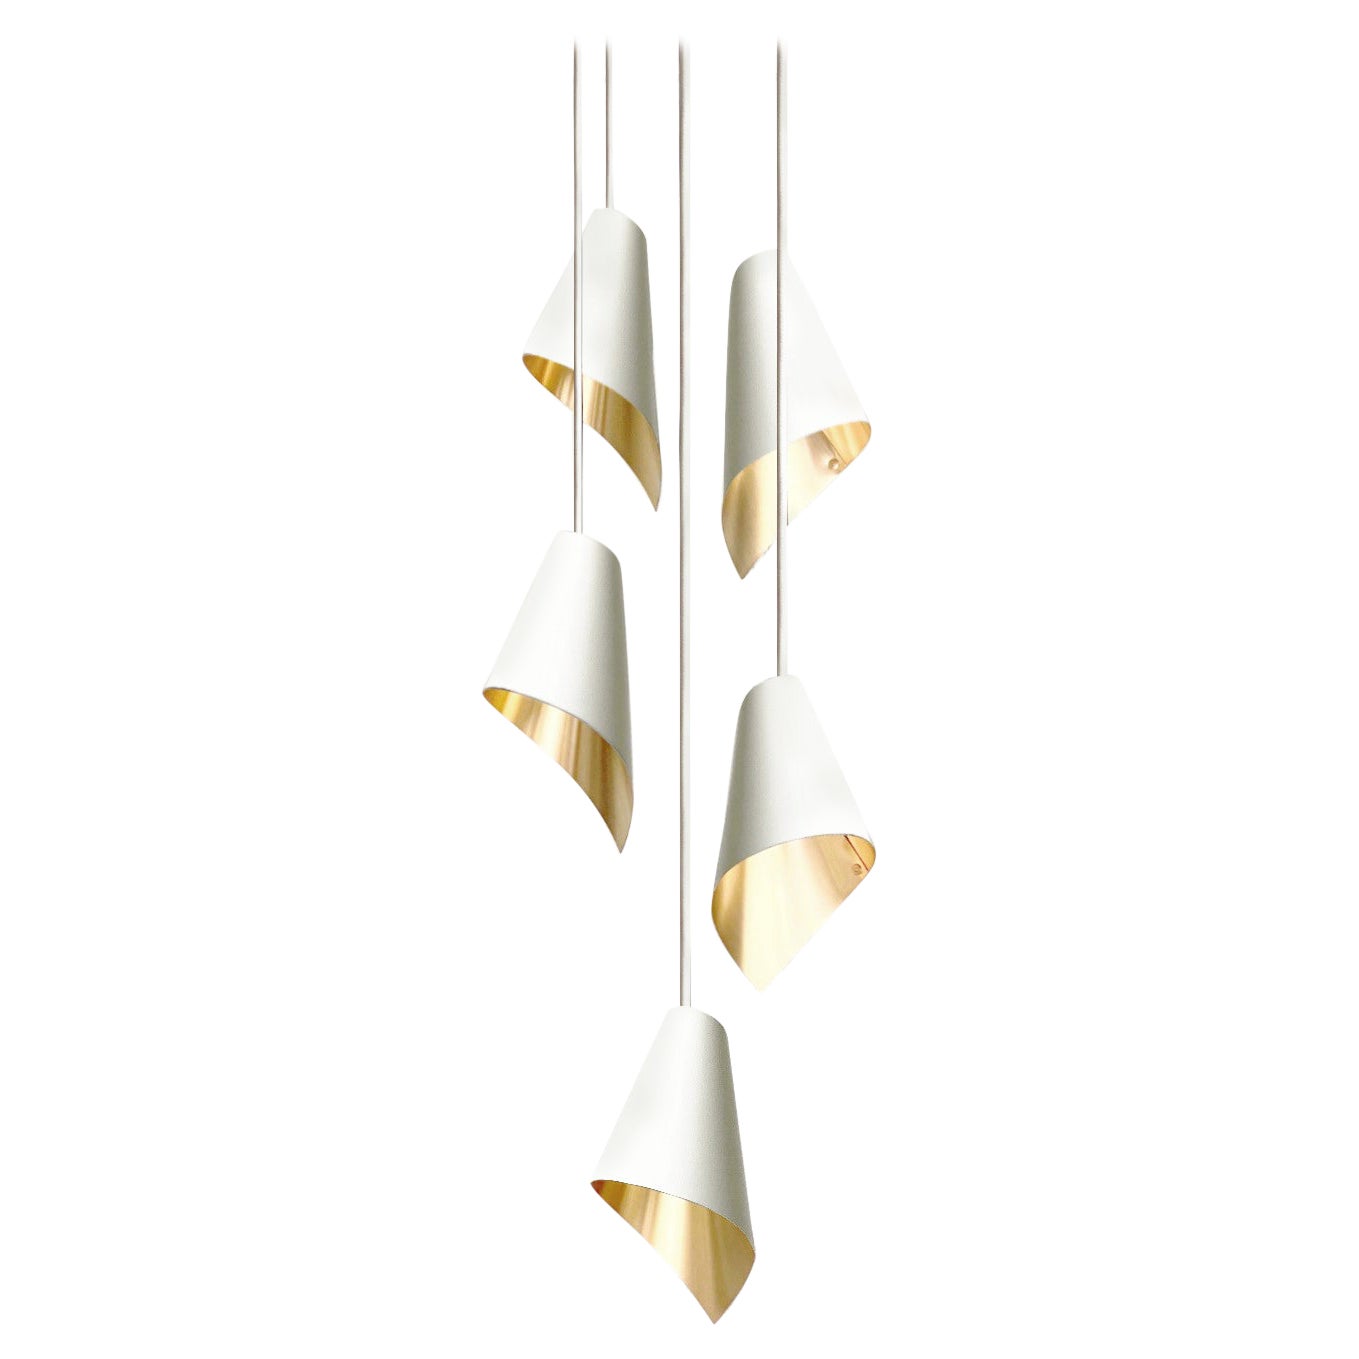 ARC 5 Modern Pendant Light Cascade in White and Brushed Brass, Made in Britain For Sale